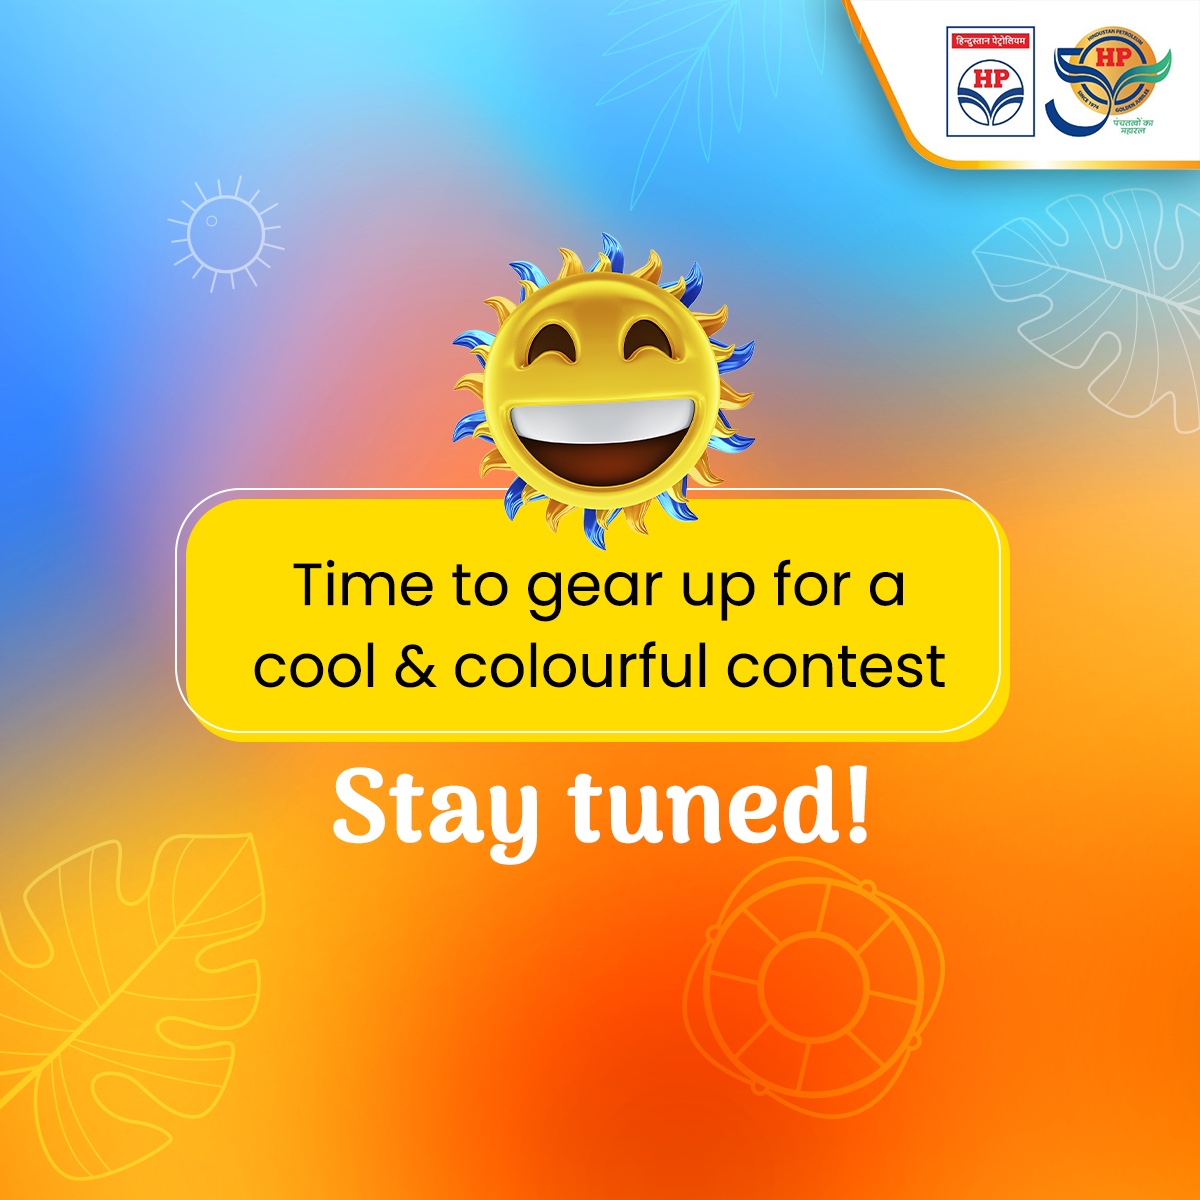 A cool contest is on its way with loads of fun & lots of prizes. Stay tuned!

#MayContest #HPTowardsGoldenHorizon #HPCL #DeliveringHappiness